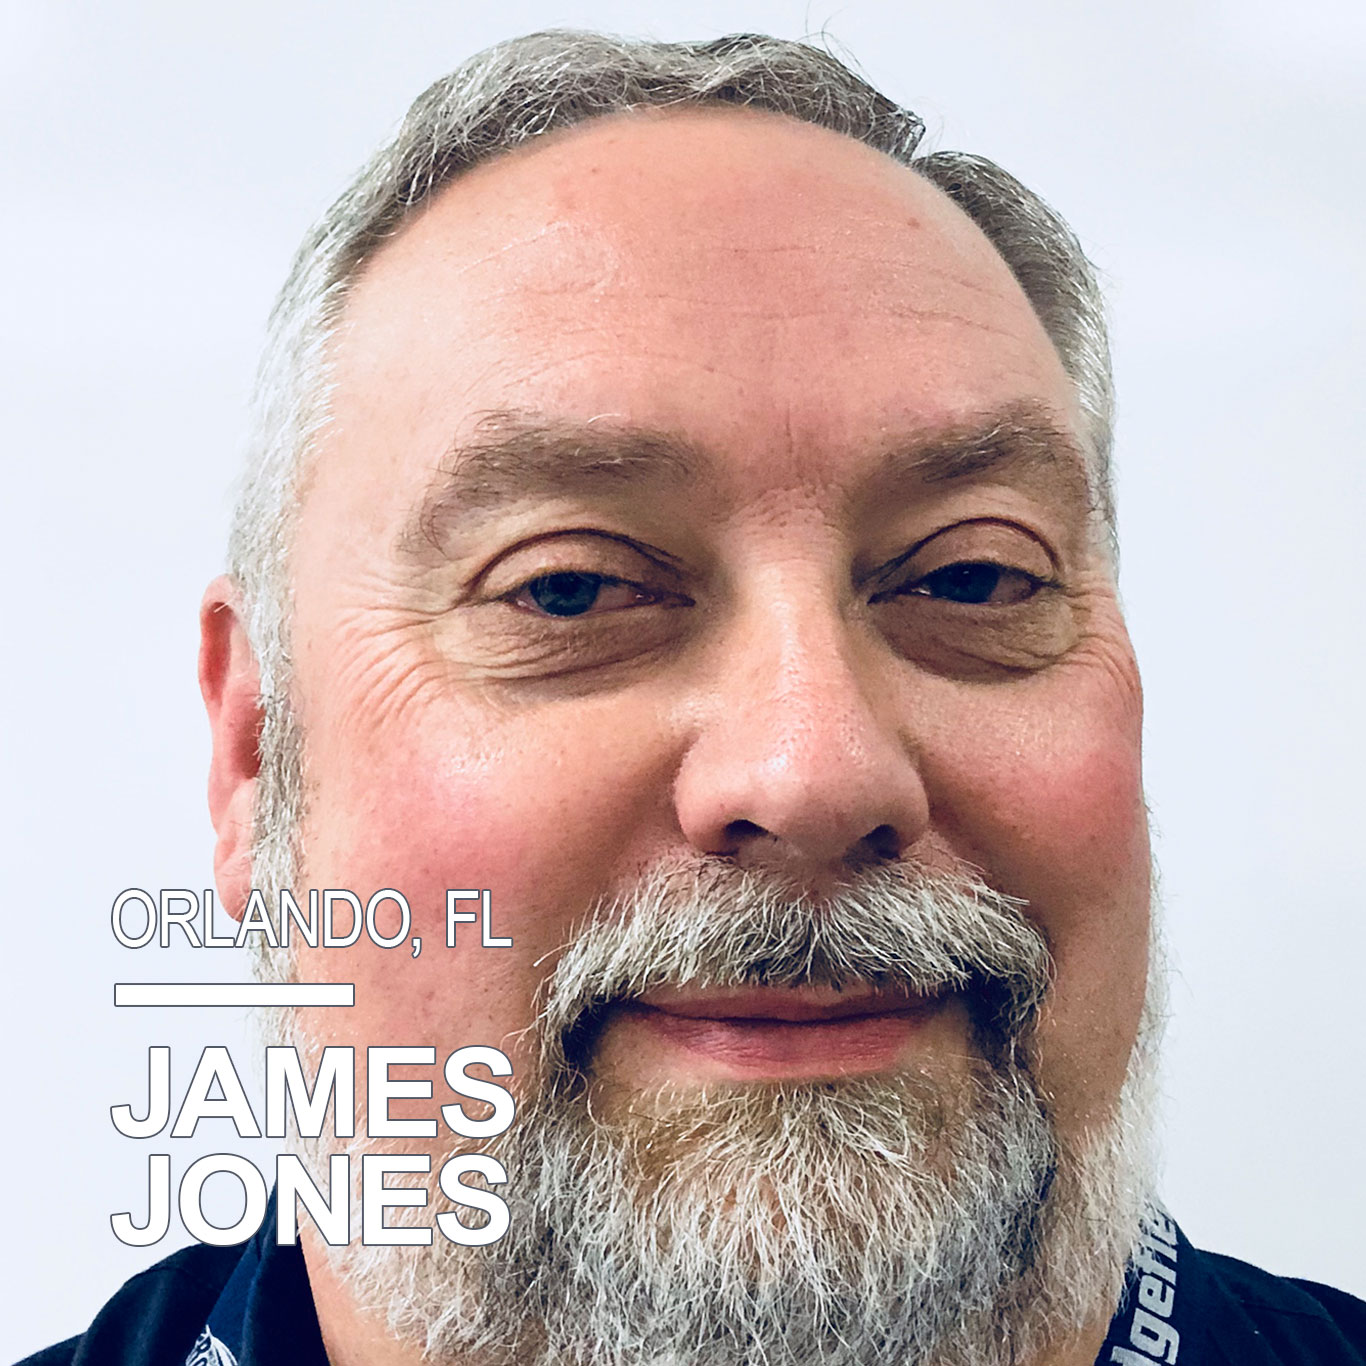 James Jones has taught science, computer science, robotics, and engineering for 26+ years. He currently teaches at Wedgefield K-8 in Orlando, FL. James founded iBrick Academy, which has provided STEAM summer camps and after-school programs for 20+ years; was instrumental in the writing of the Florida state standards for high school robotics; and helped start the Summer Robotics Institute at Mid Florida Technical College. James recently assisted the county’s grants department in providing after-school robotics programs to 23 middle schools. He has three Disney Teacheriffic awards and two Epsilon Pi Tau awards.